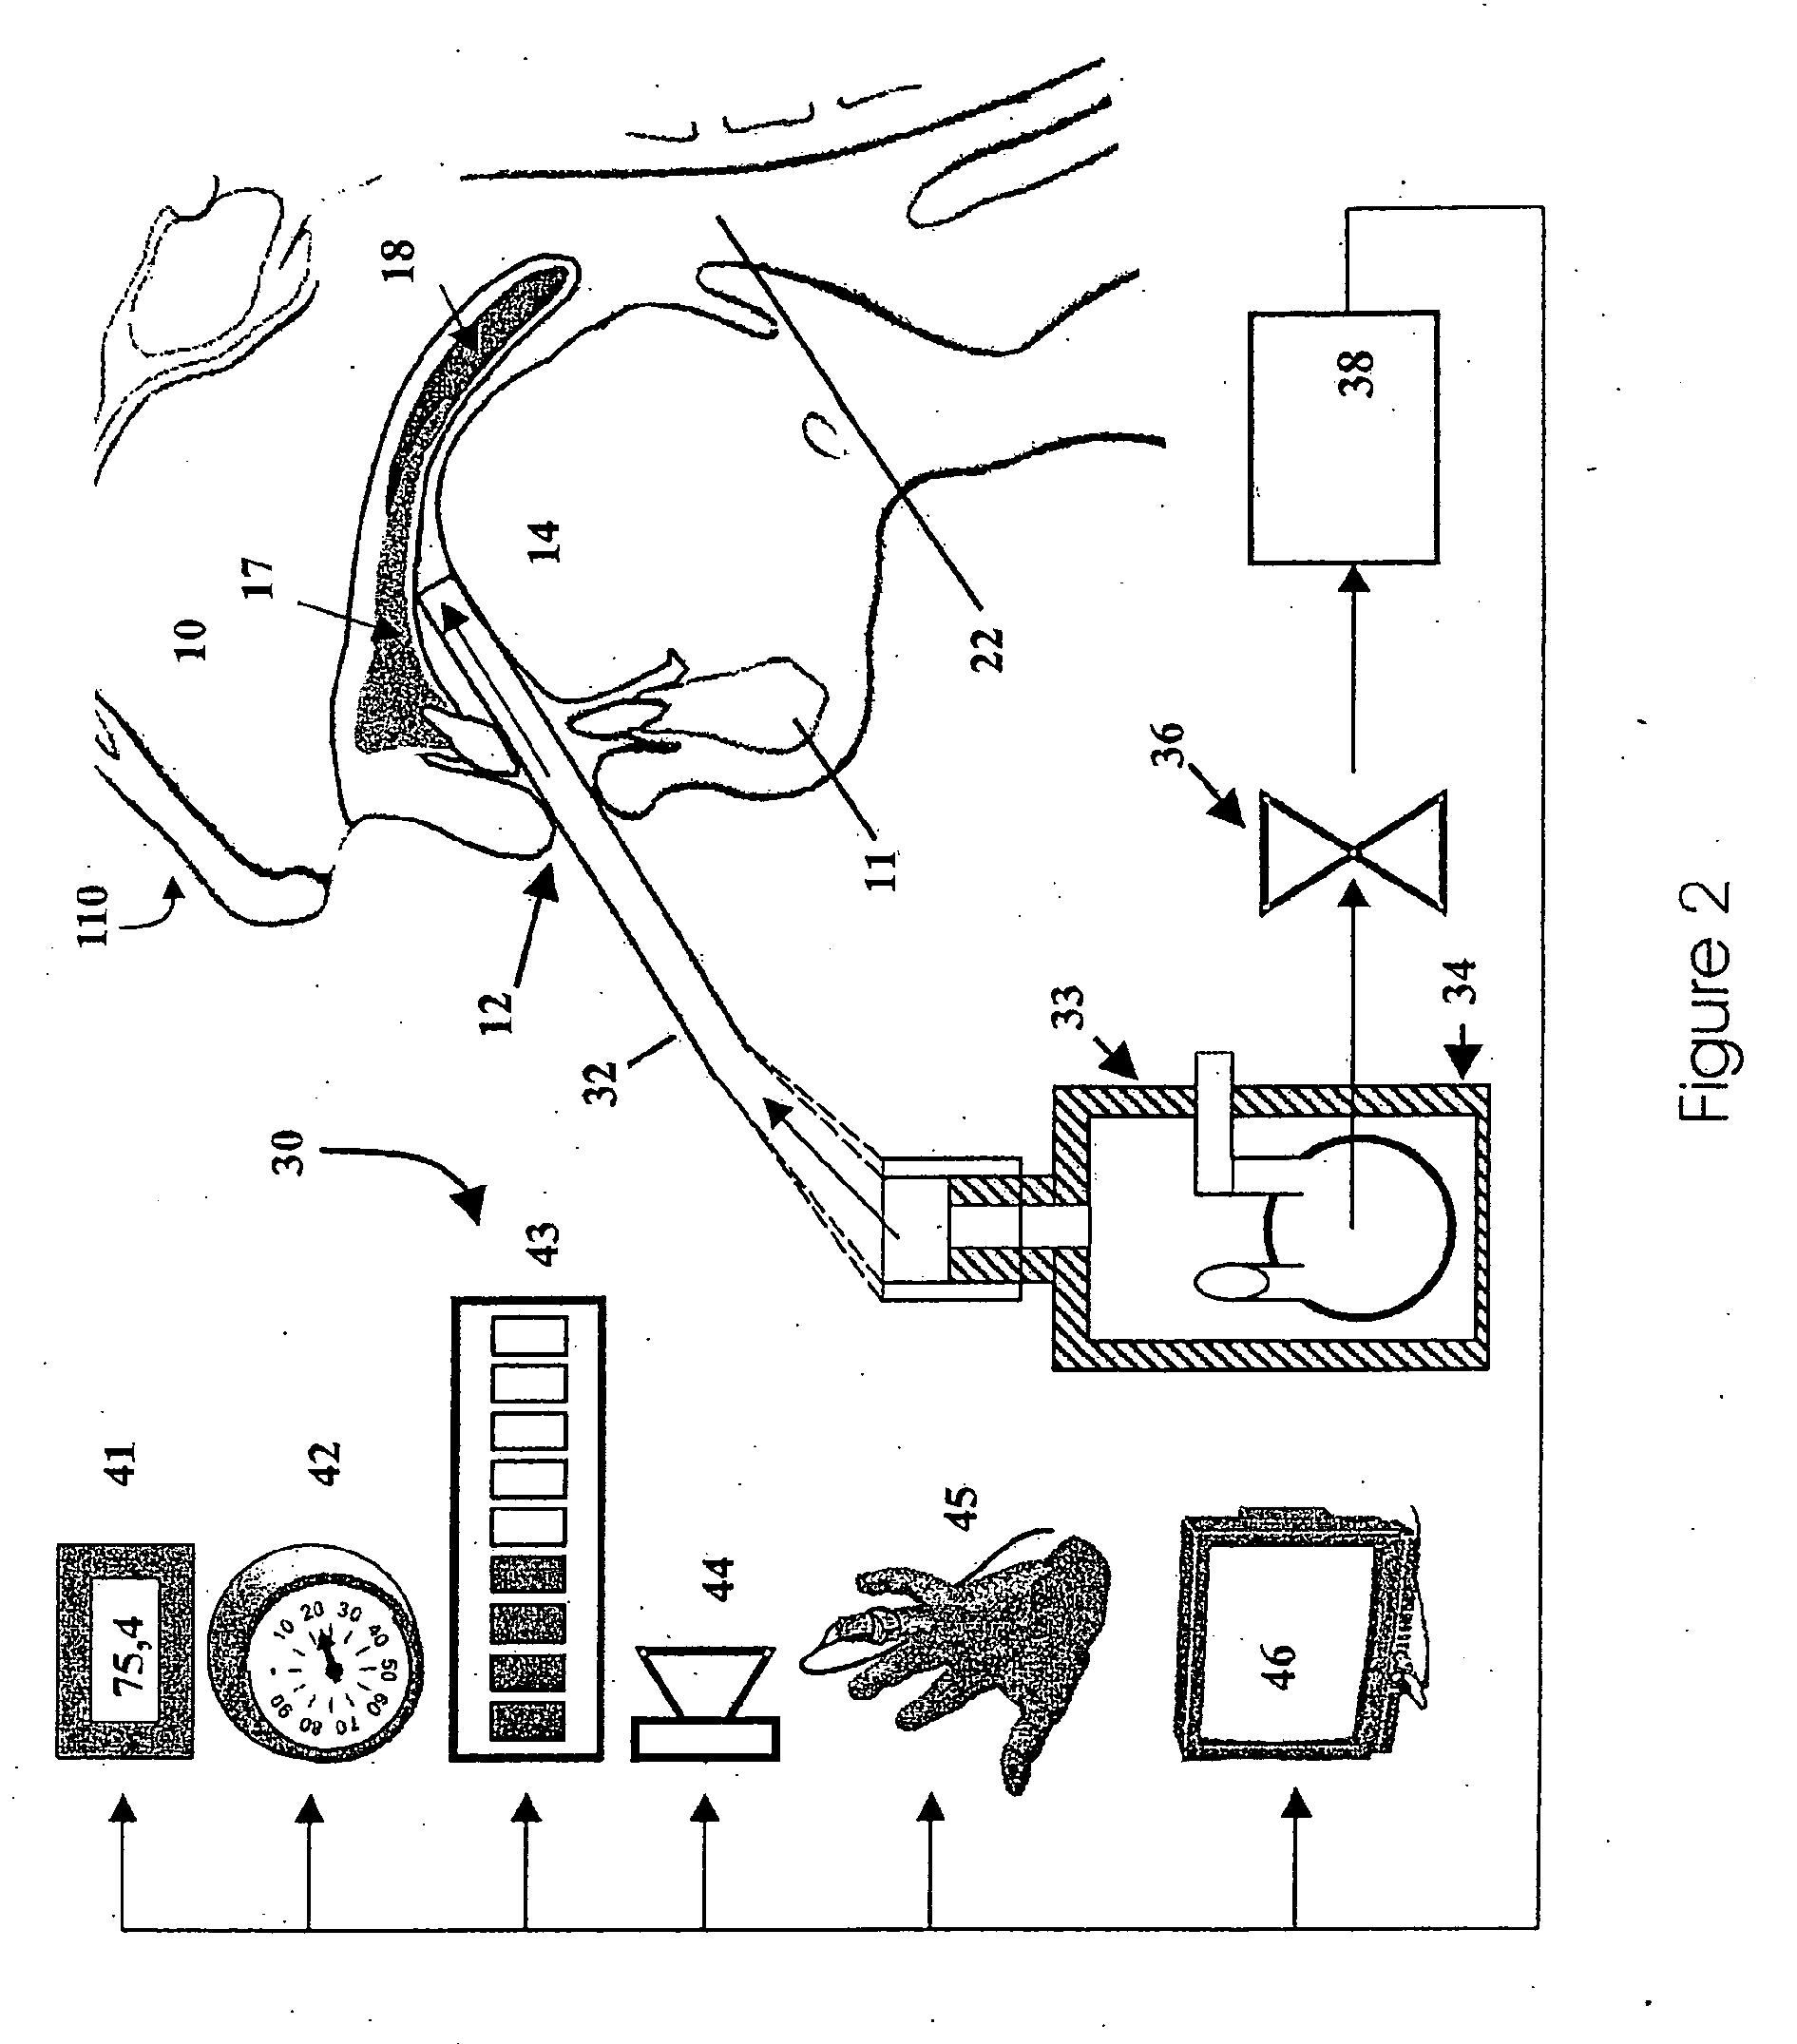 Device for strengthening soft palate muscles